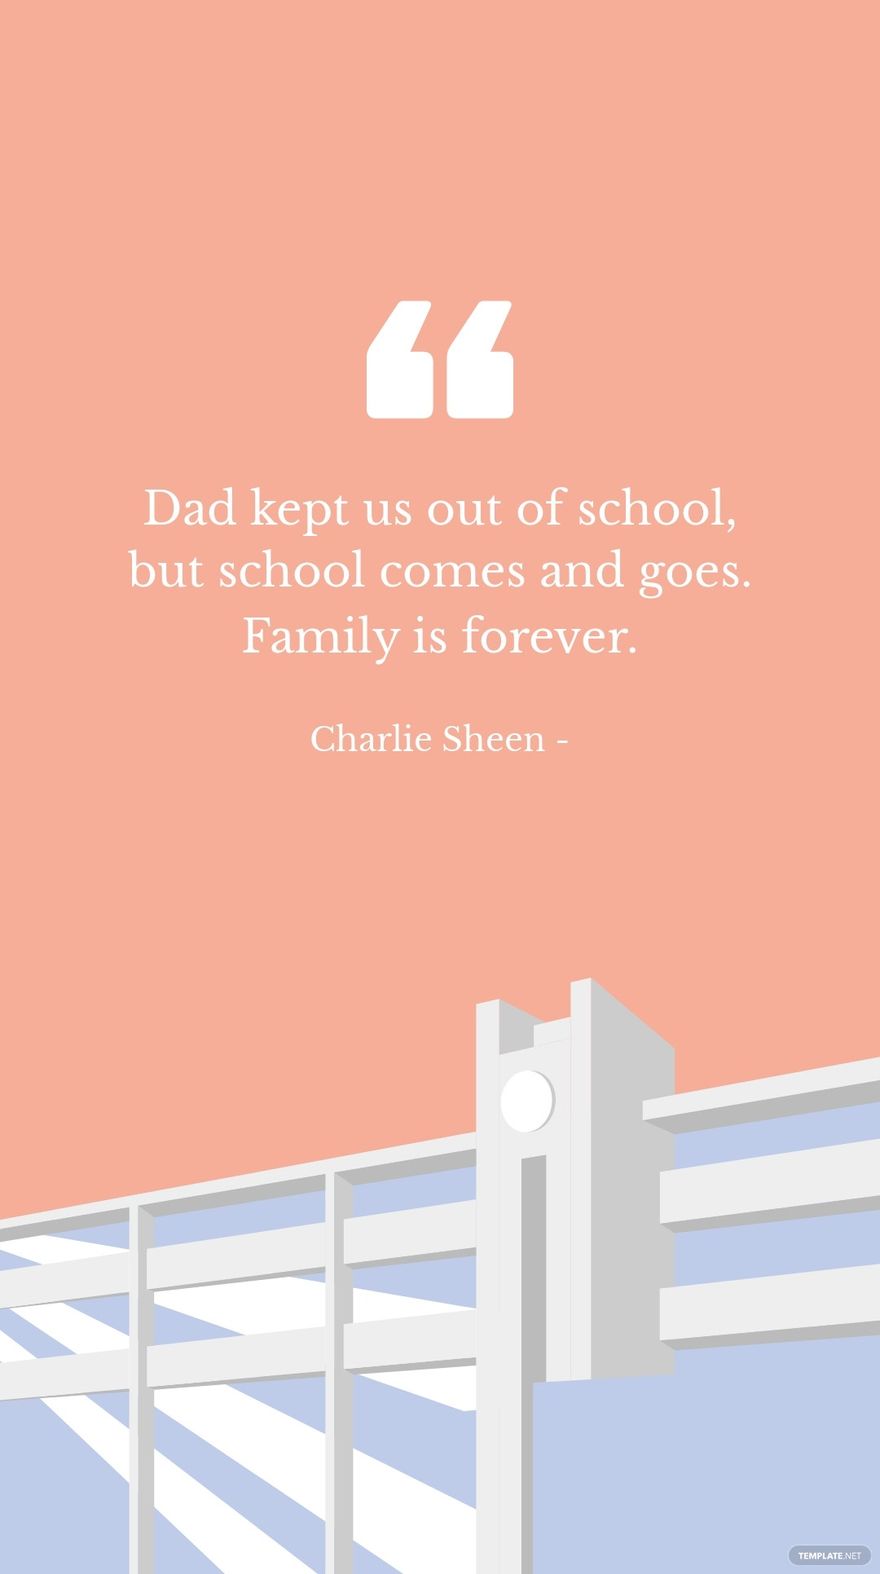 Free Charlie Sheen - Dad kept us out of school, but school comes and goes. Family is forever. in JPG